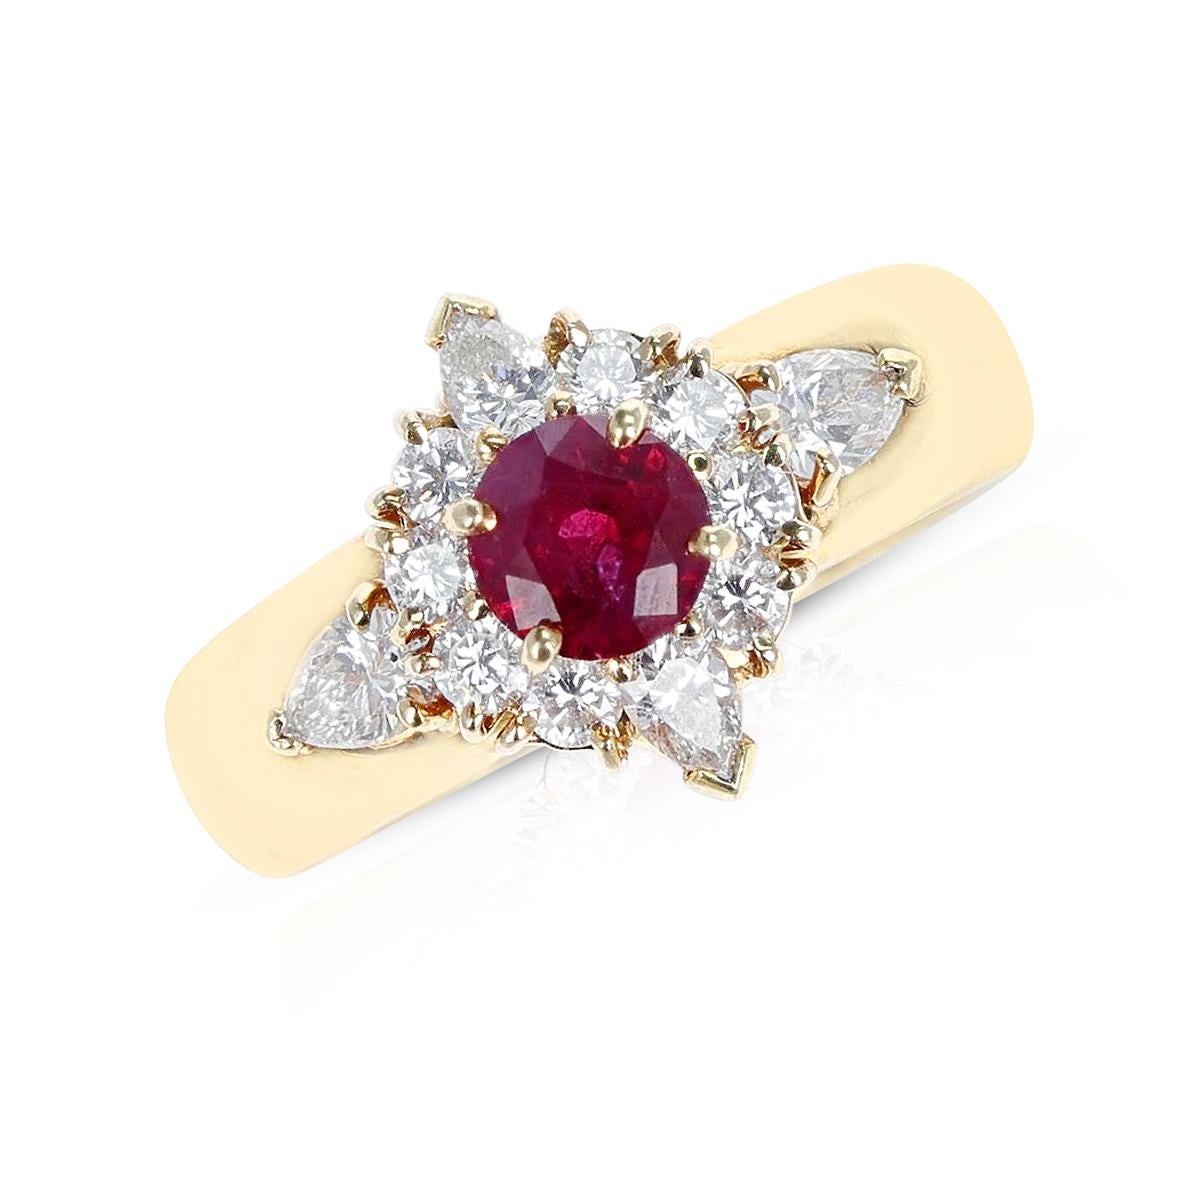 Van Cleef & Arpels Round Ruby Ring with Diamonds made in 18 Karat Yellow Gold. The diamonds are pear and round shapes on the ring. The ring size is US 6. The total weight of the ring is 9.82 grams. 